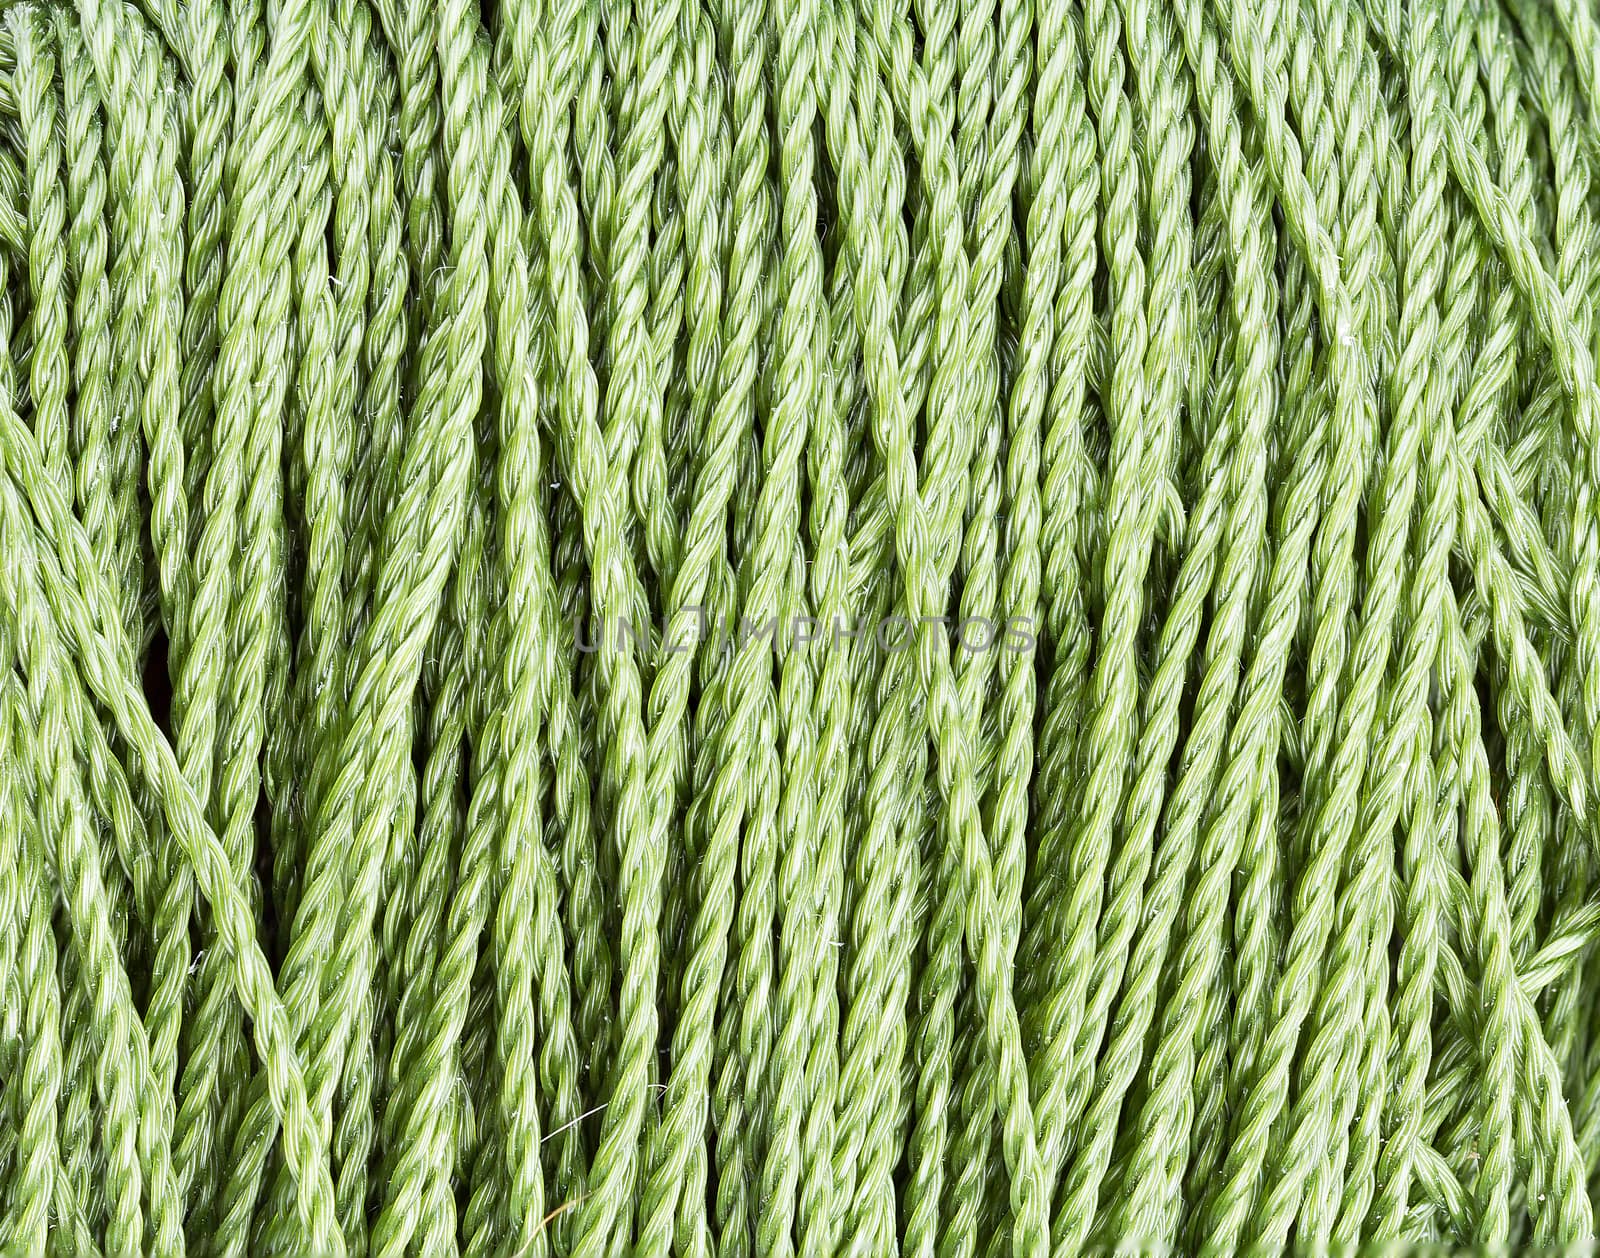 nylon green Rope texture pattern for background